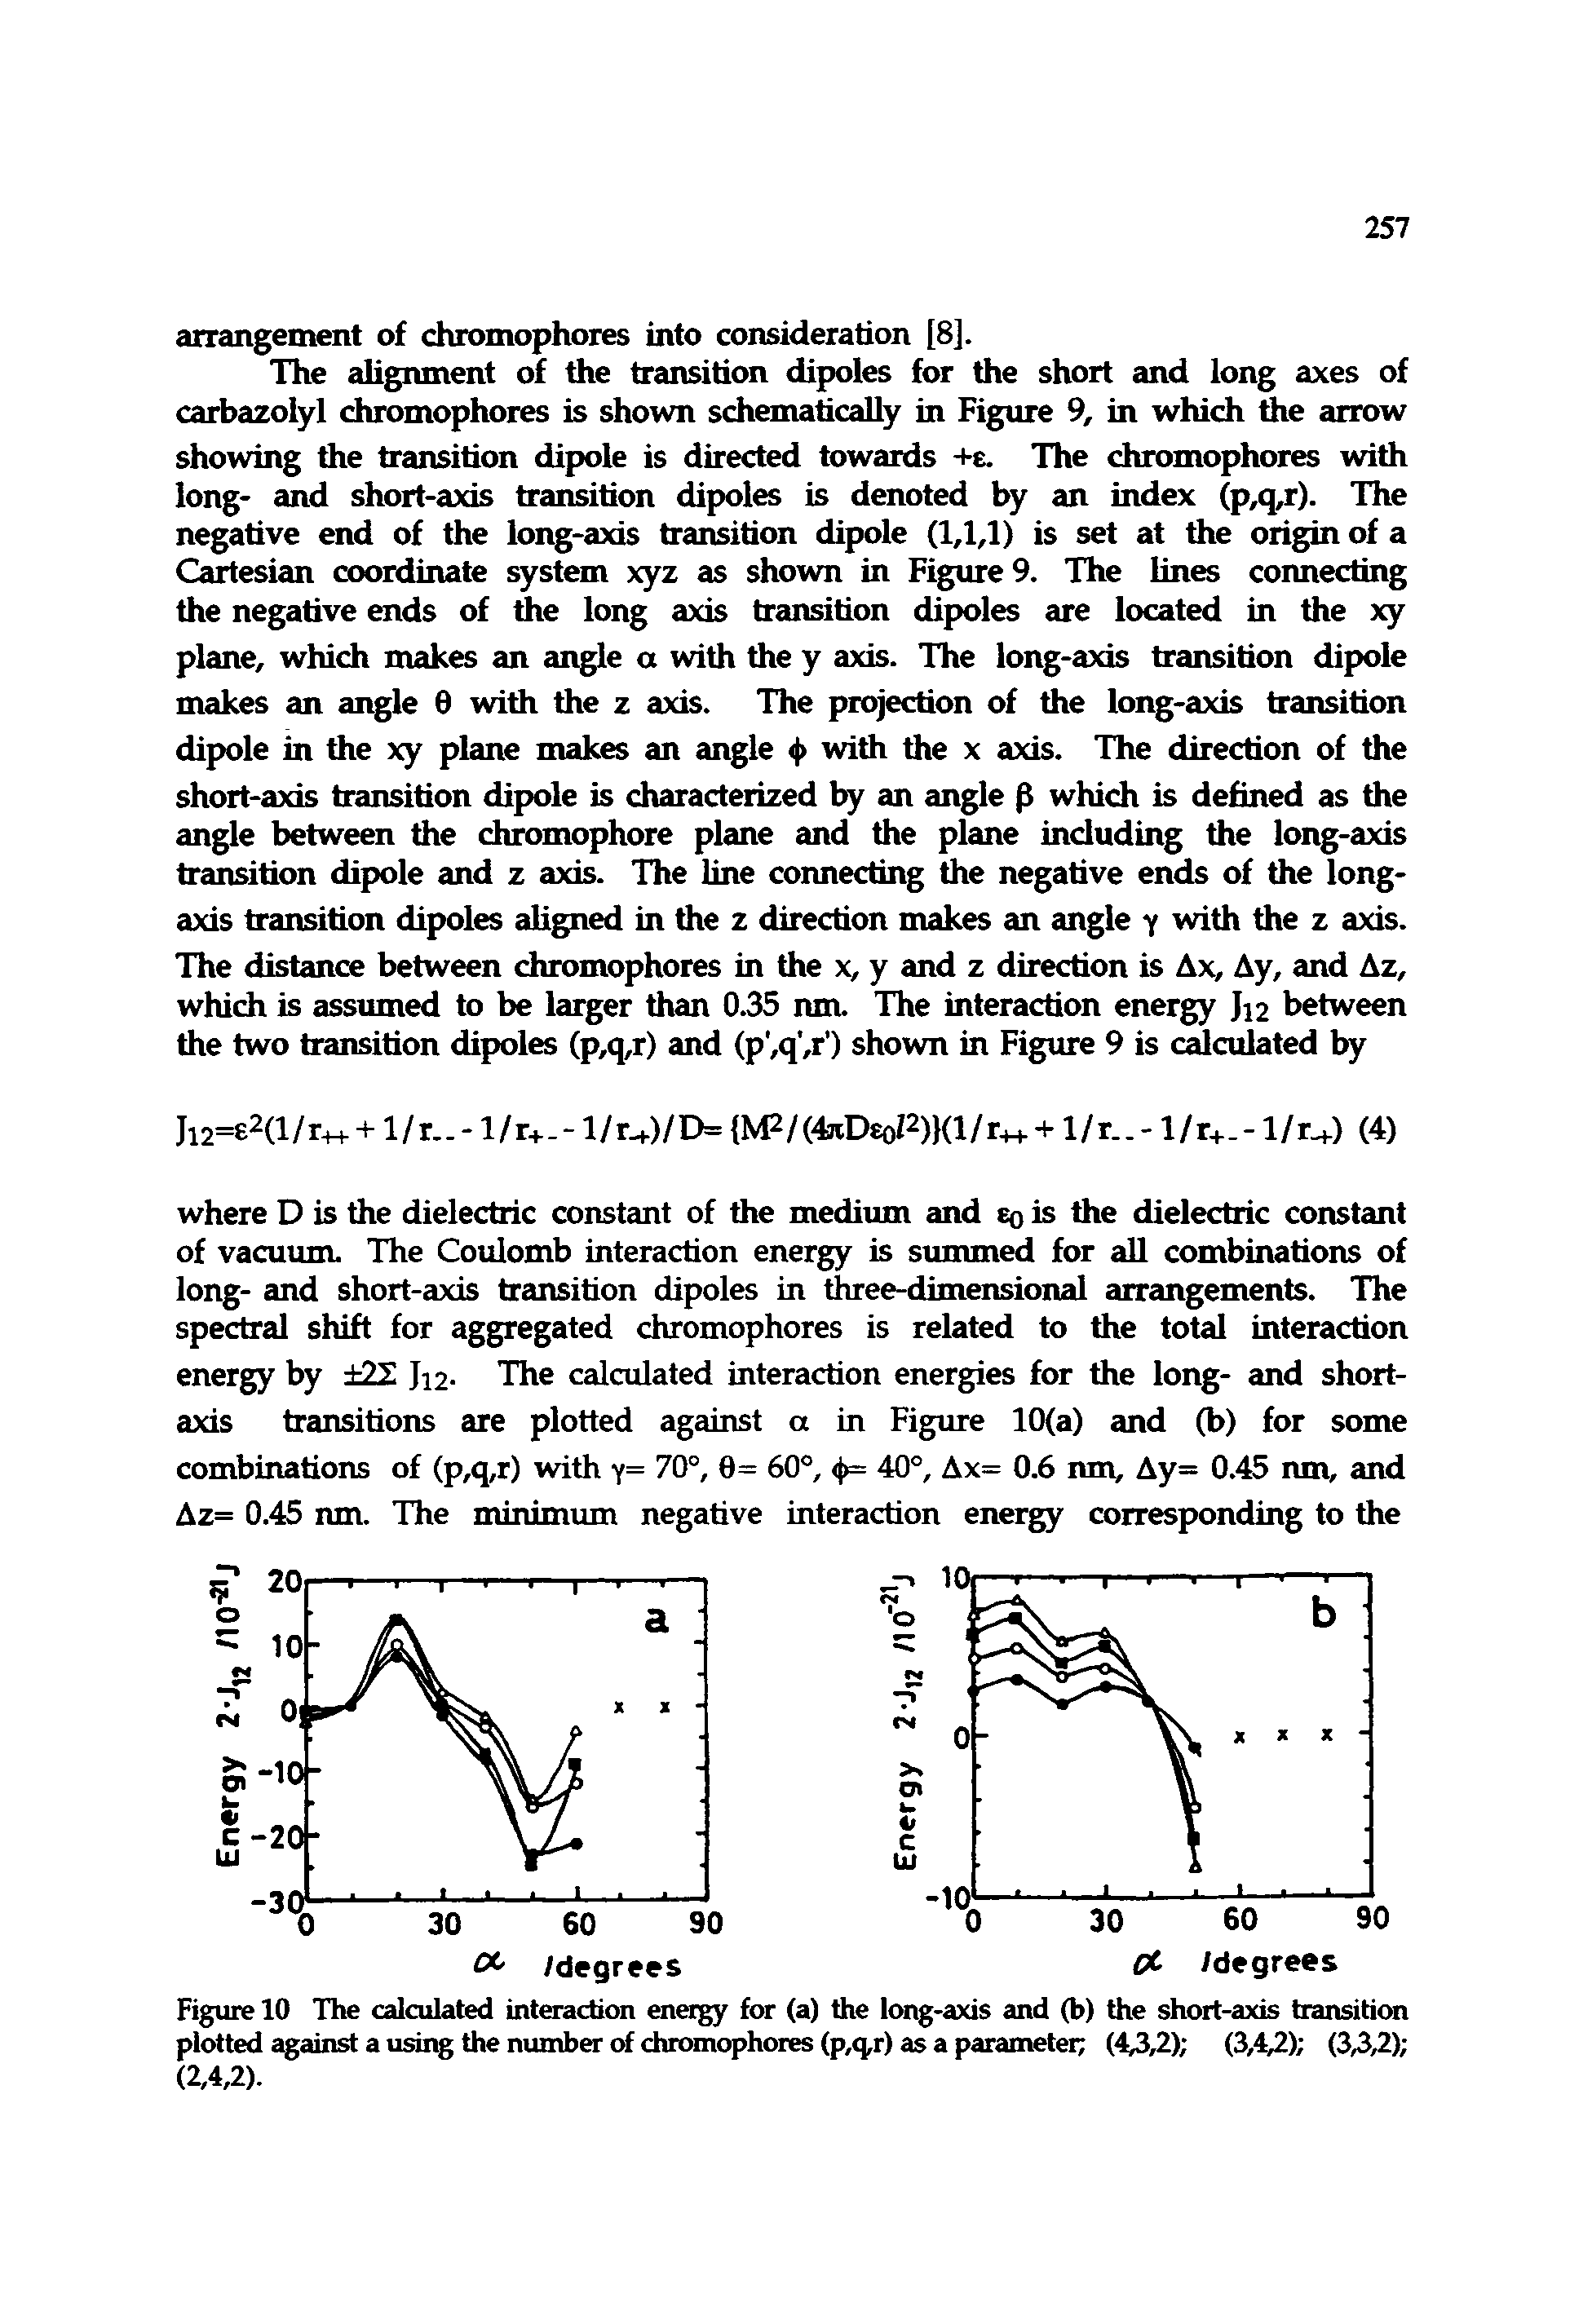 Figure 10 The calculated interaction energy for (a) the long-axis and (b) the short-axis transition plotted against a using the number of chromophores (p,q,r) as a parameter (444) (3,4,2) (344) ...